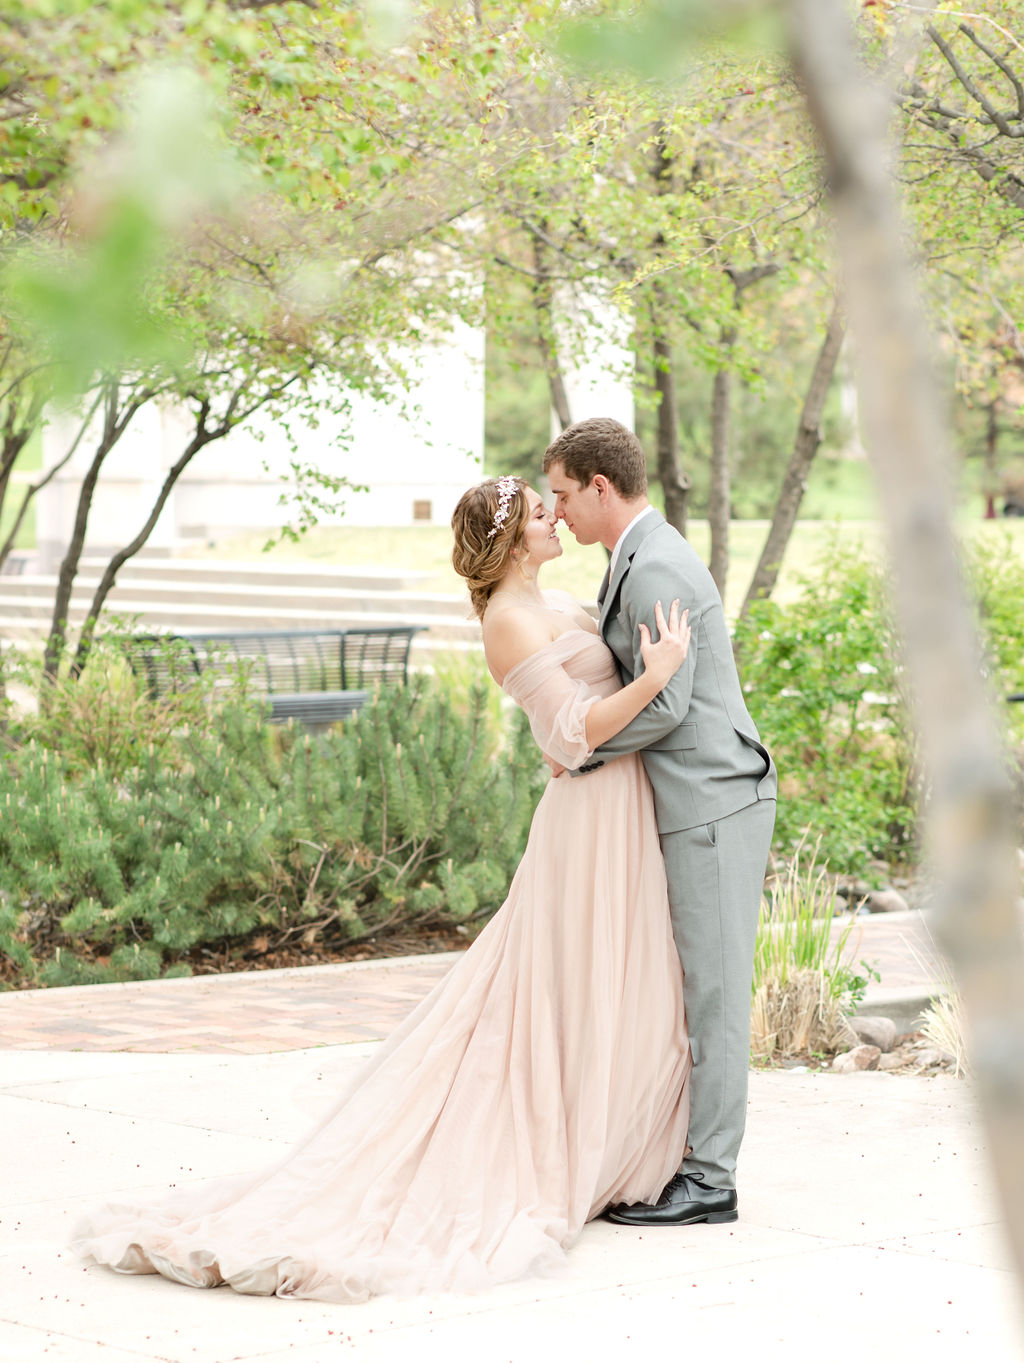 Romantic wedding style at Cable Center Events in Denver